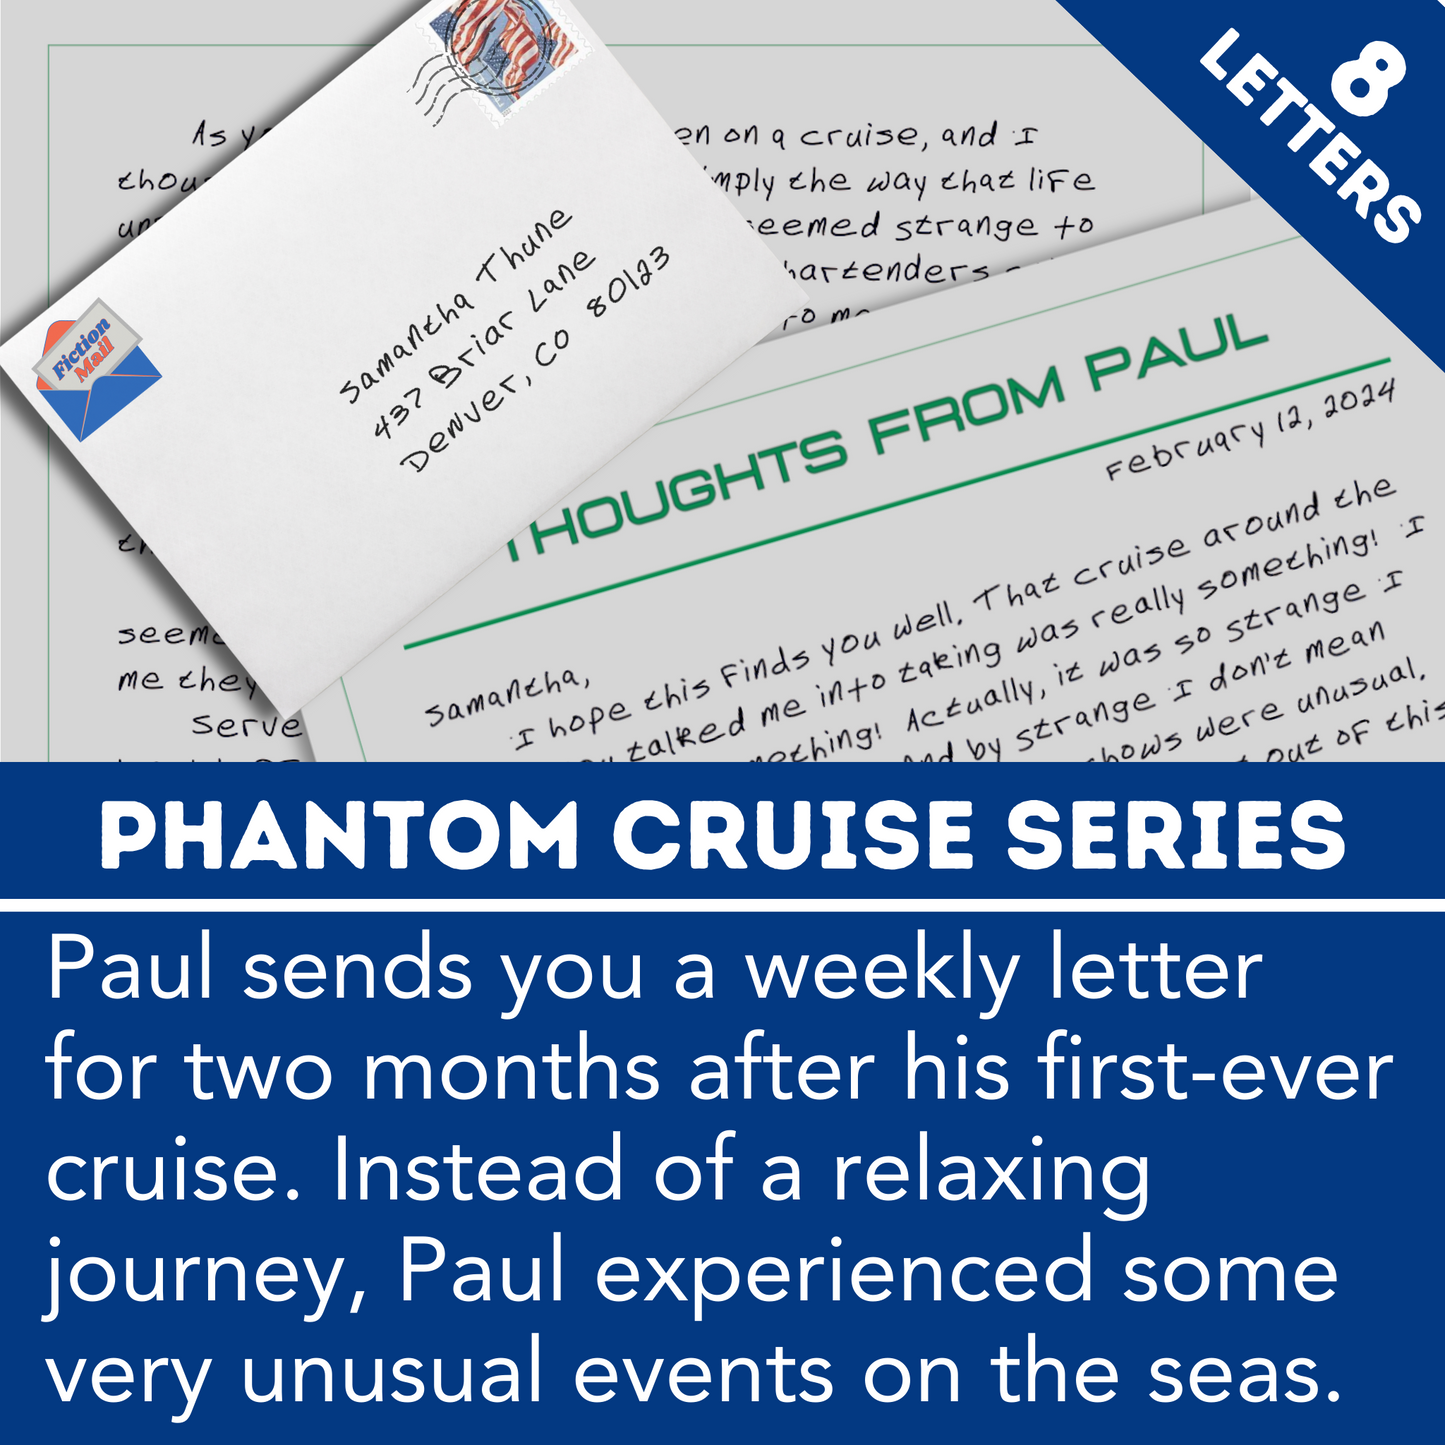 Phantom Cruise Series of Fiction Mail - get a weekly letter from Paul for 2 months about his very unusual cruise.